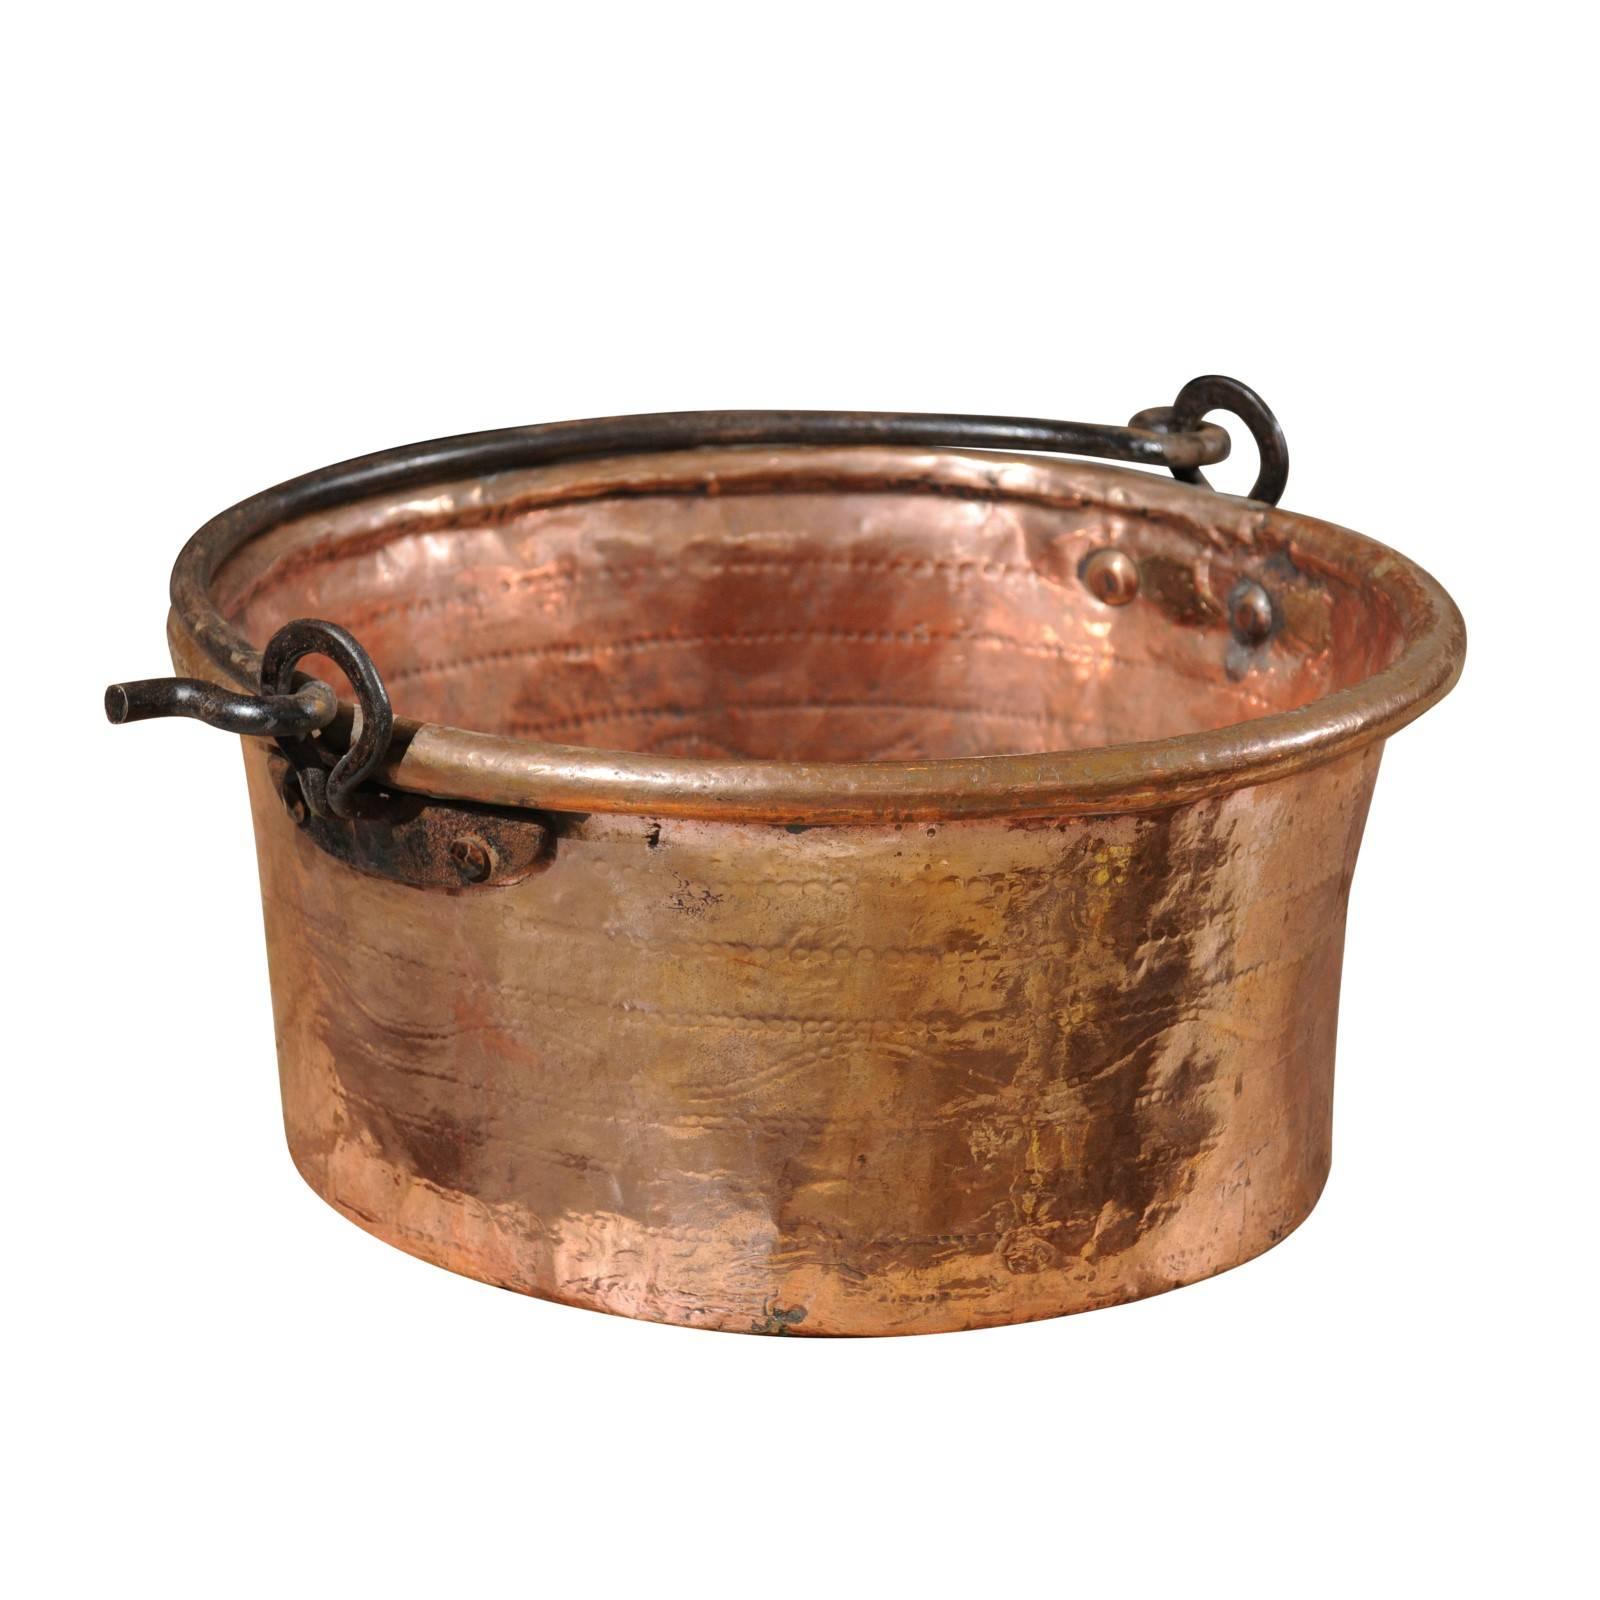 1910s Large Size Round French Copper Pot with Movable Iron Handle